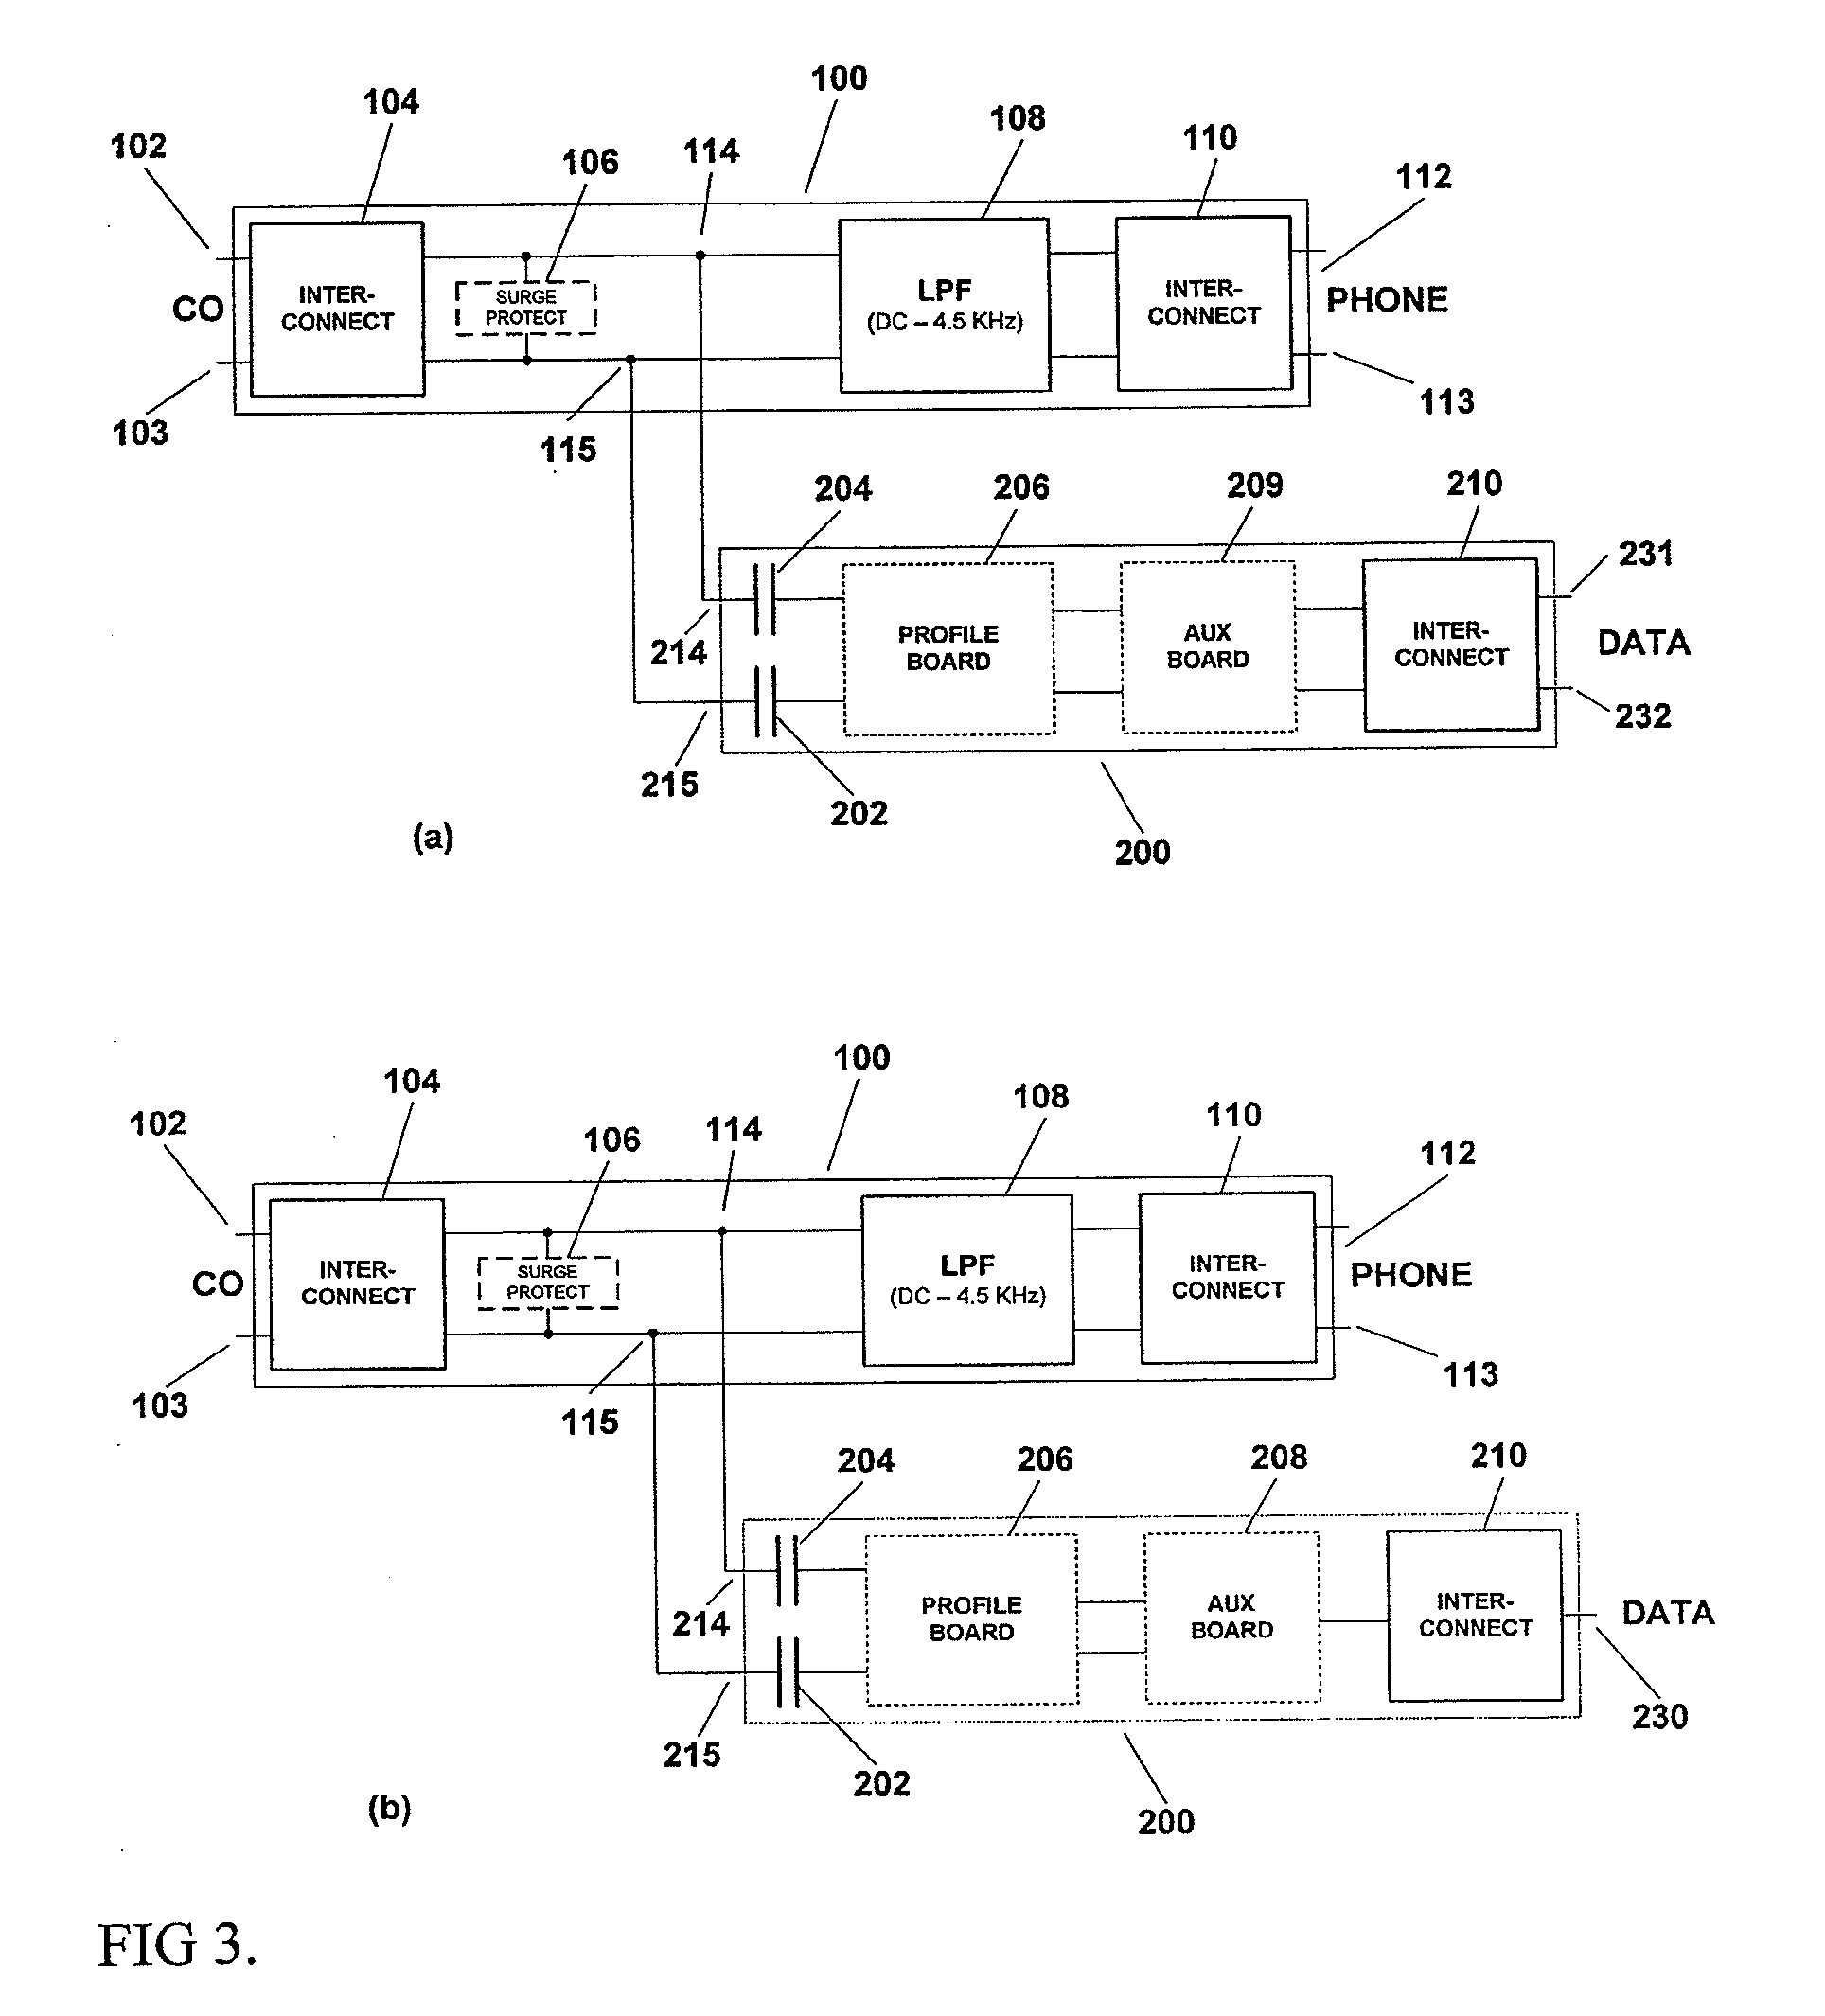 METHOD AND APPARATUS FOR UNIVERSAL xDSL DEMARCATION INTERFACE WITH MULTI-FUNCTIONAL CAPABILITY AND SIGNAL PERFORMANCE ENHANCEMENT